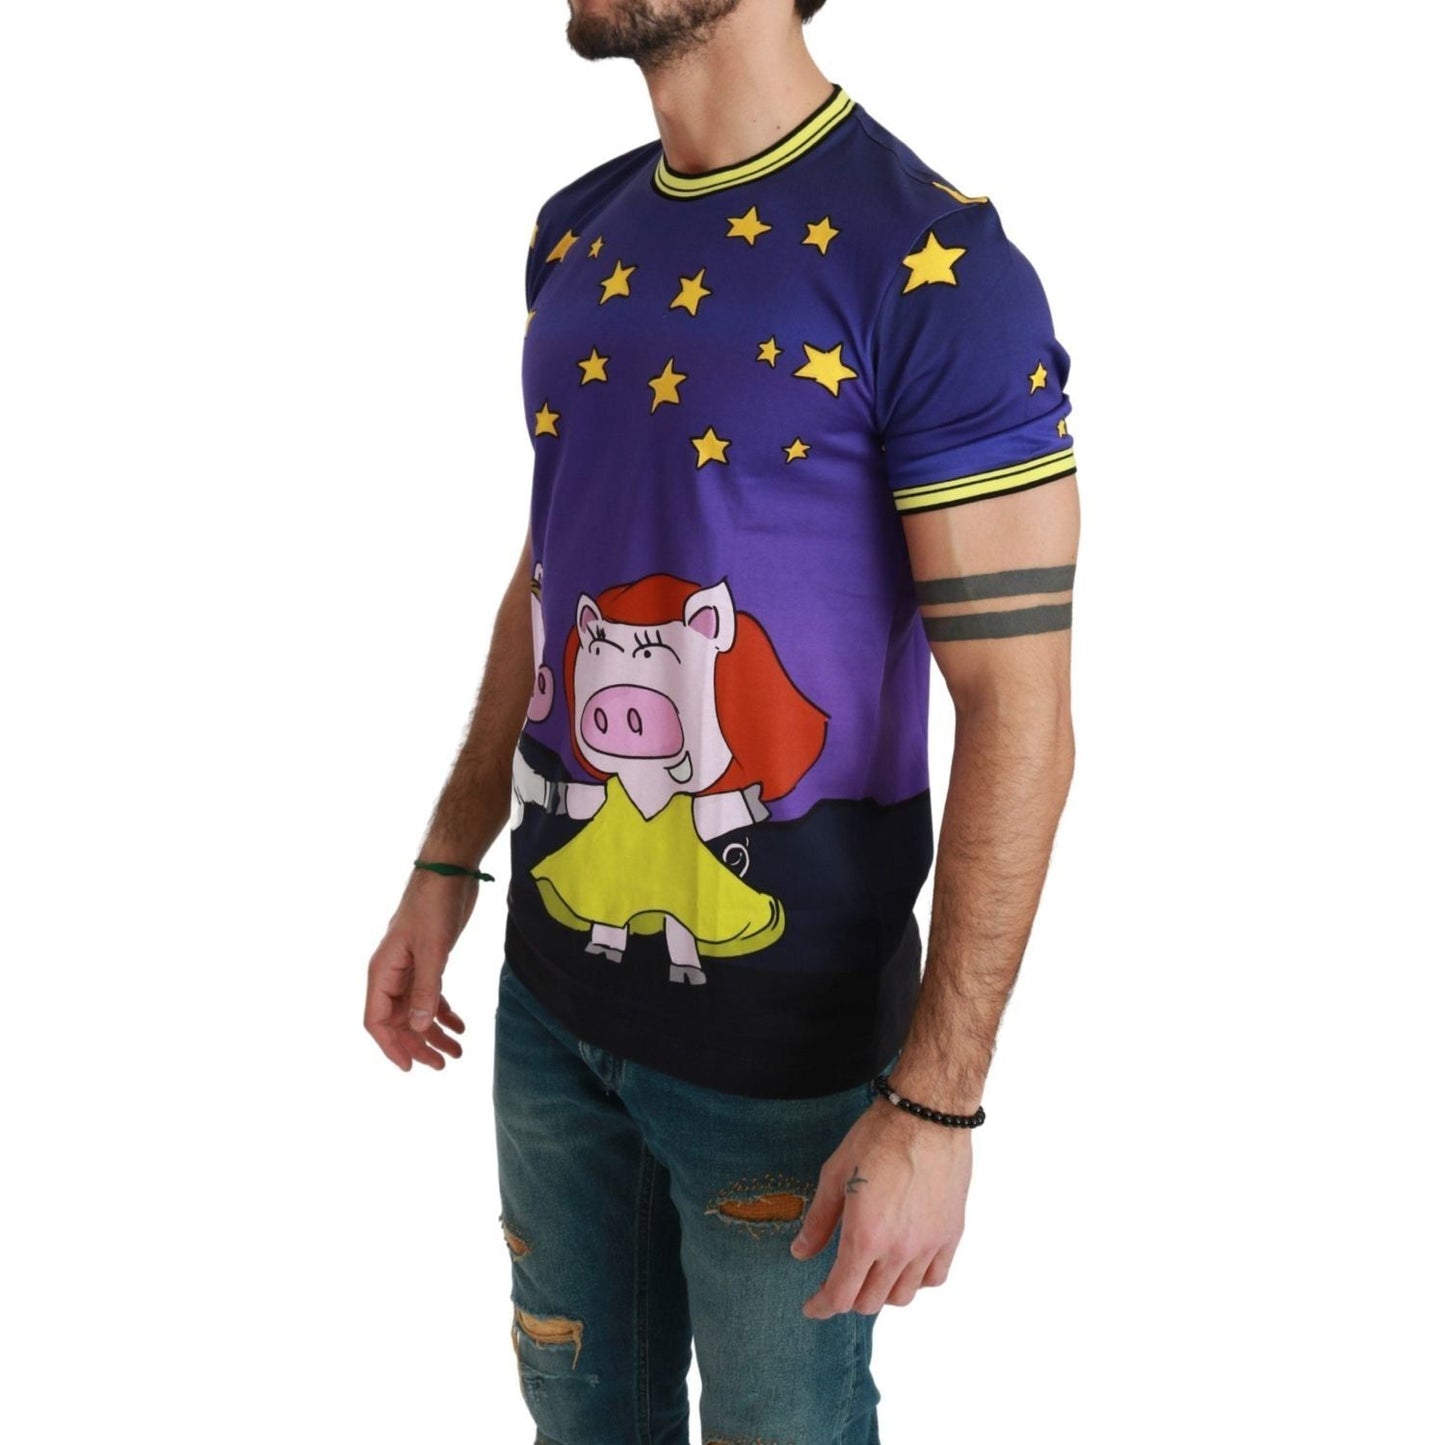 Dolce & Gabbana Purple Cotton Round Neck T-Shirt with Pig Motif purple-cotton-top-2019-year-of-the-pig-t-shirt IMG_0469-1-scaled-8f414341-fa0.jpg